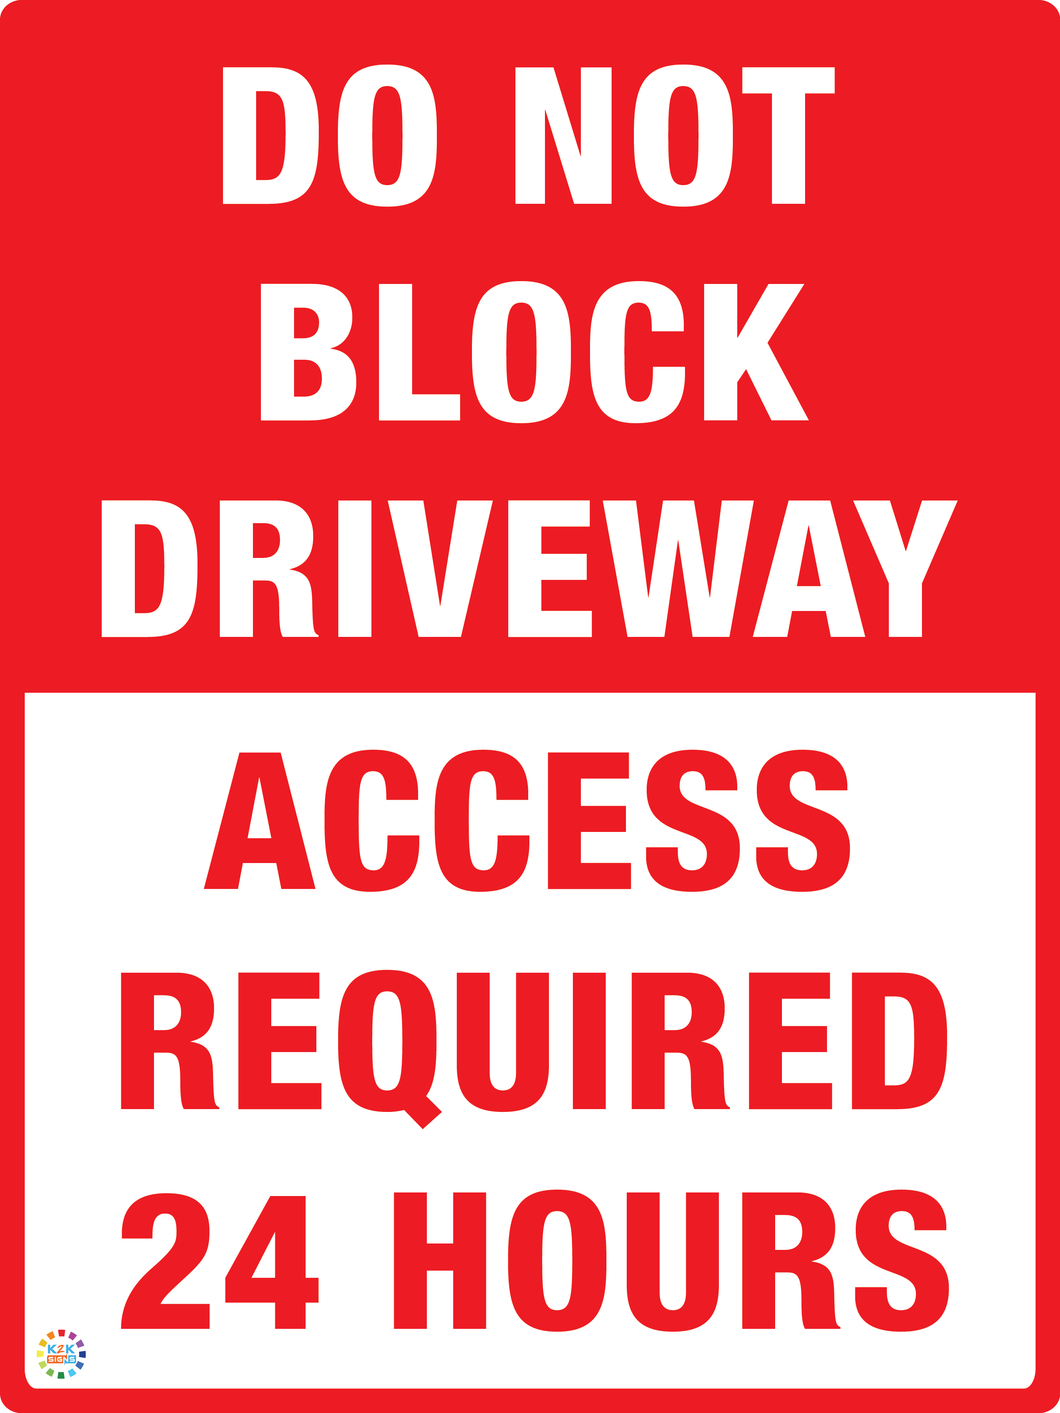 Do Not Block Driveway - Access Required 24 Hours Sign